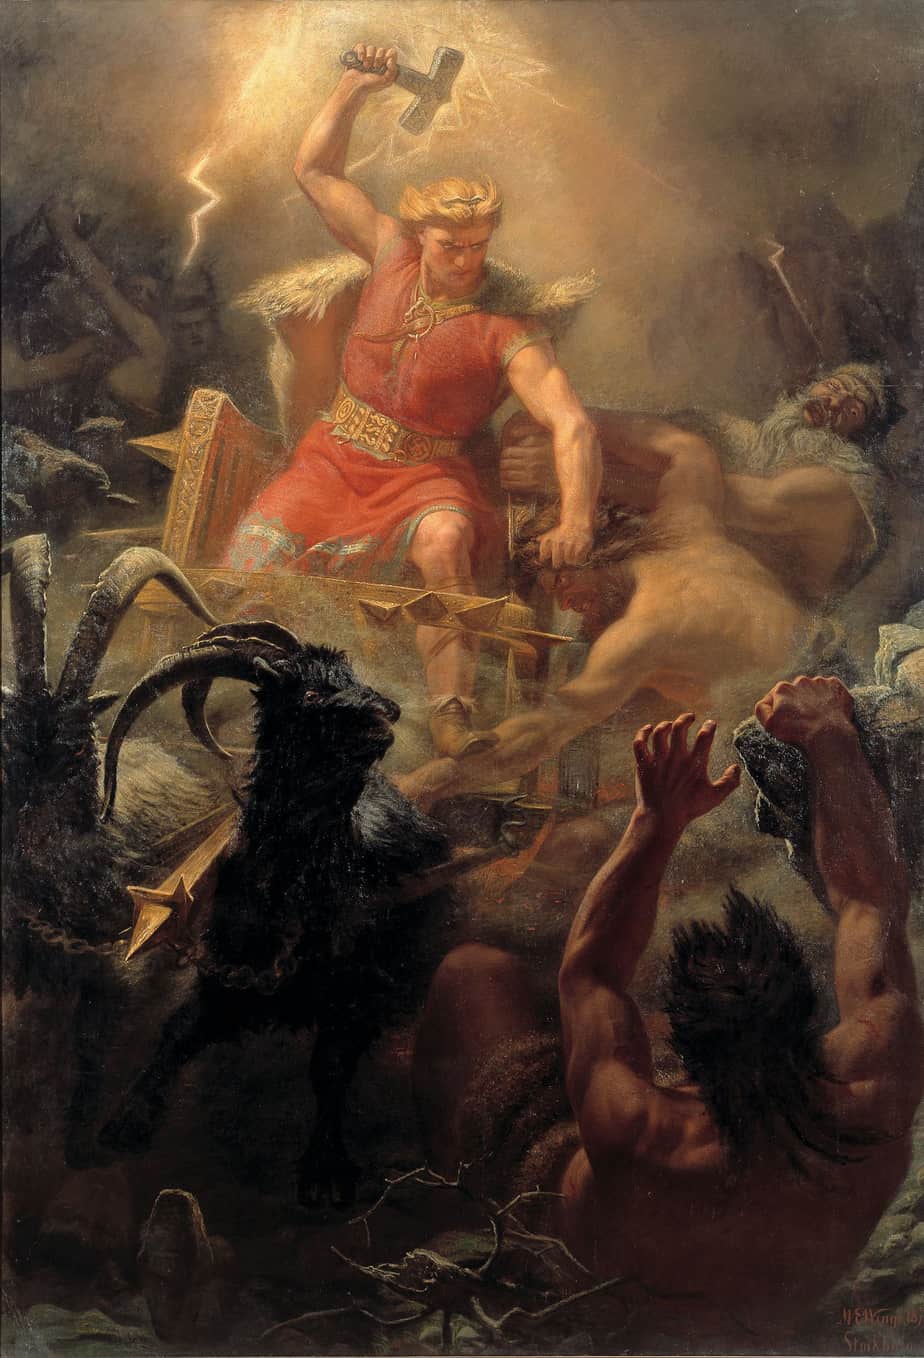 Thor's Fight with the Giants (1872) by Mårten Eskil (Swedish, 1825-1896). The thunder god rides his chariot pulled by goats